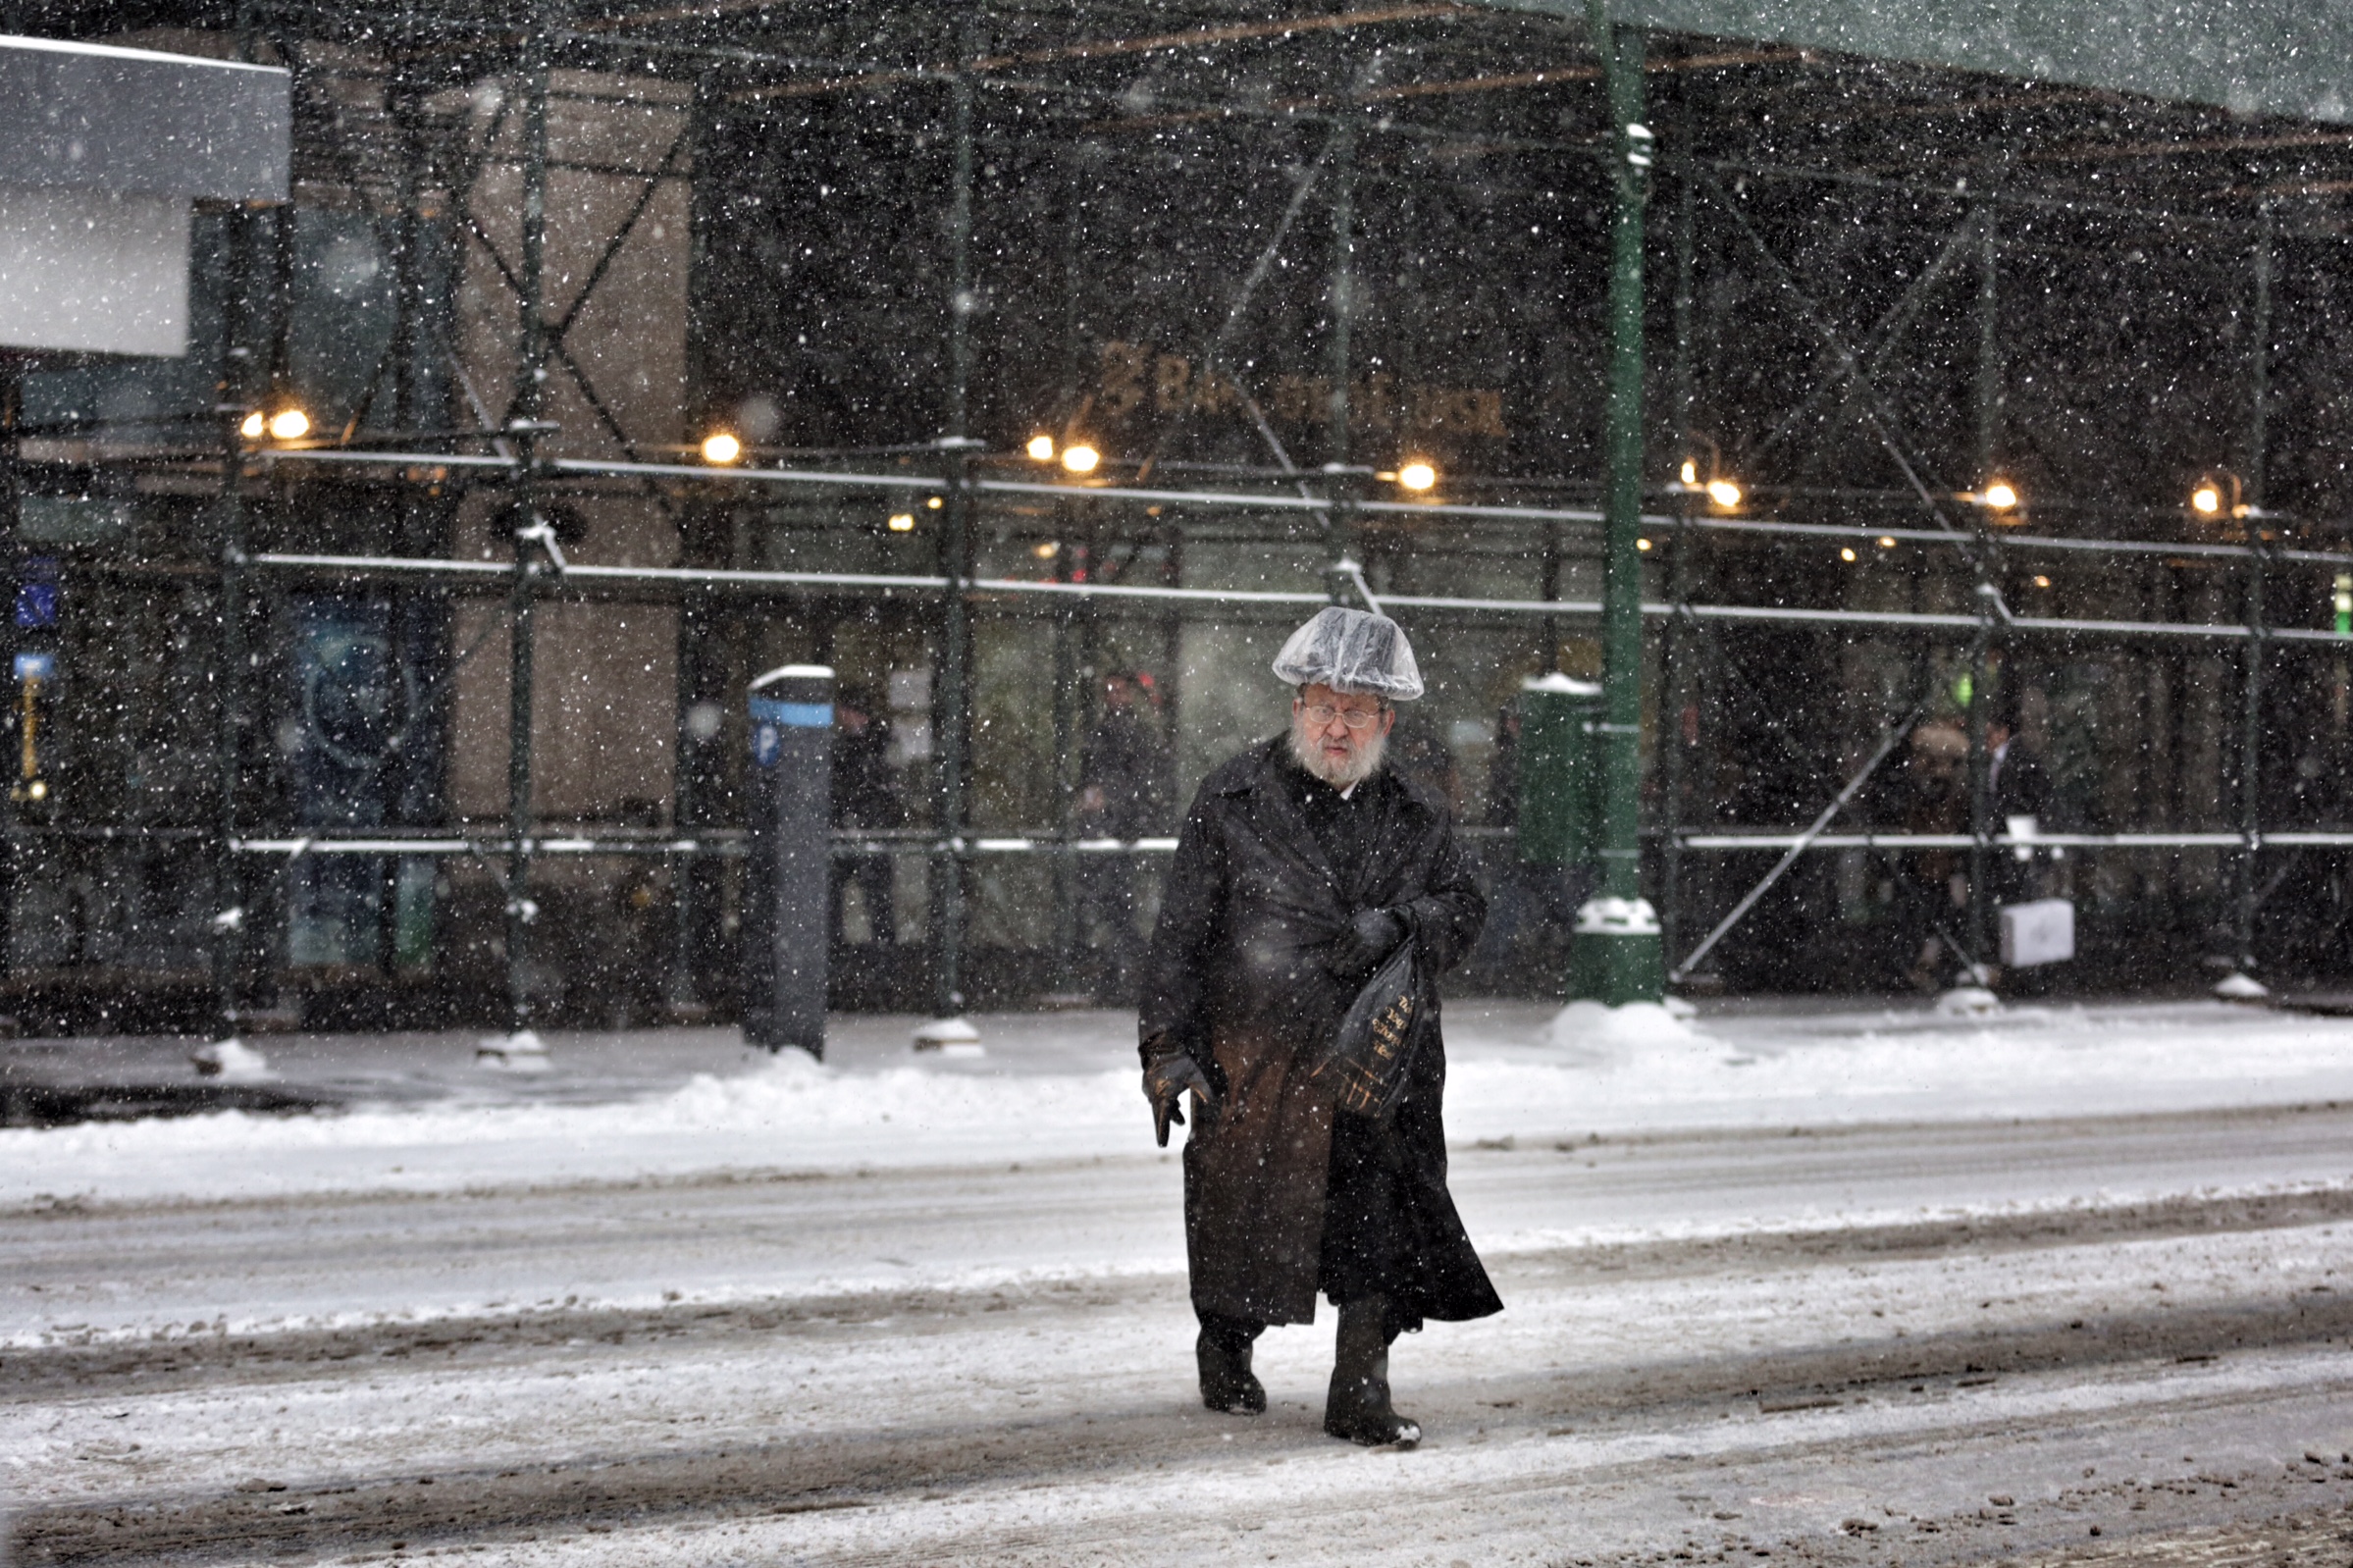 A man crosses the street during a snow storm in New York City on Jan. 26, 2015.